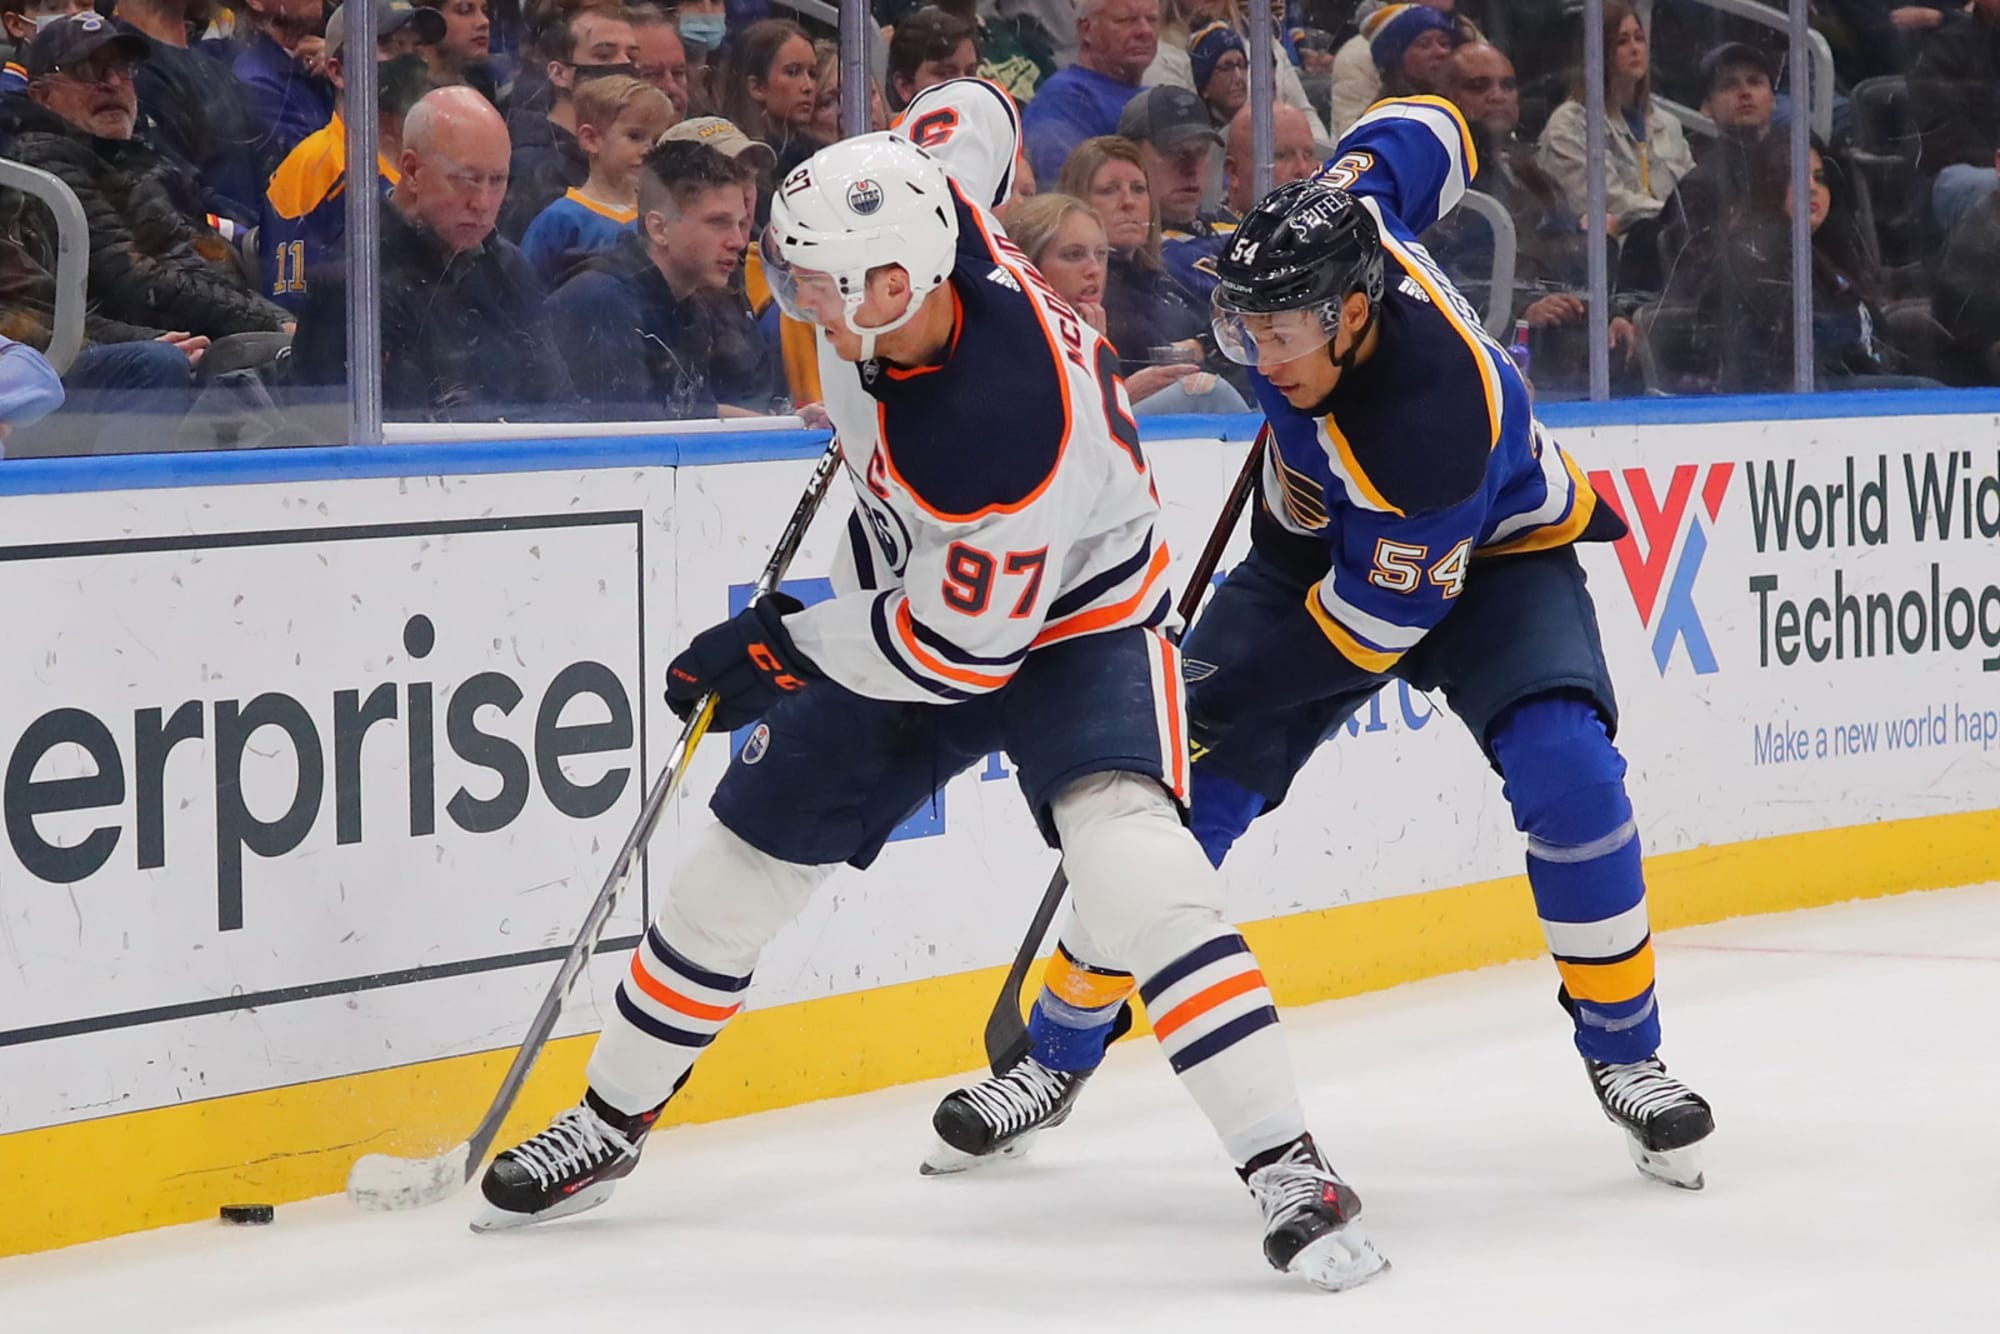 Edmonton Oilers Vs Blues Date, Time, Streaming, Betting Odds, More